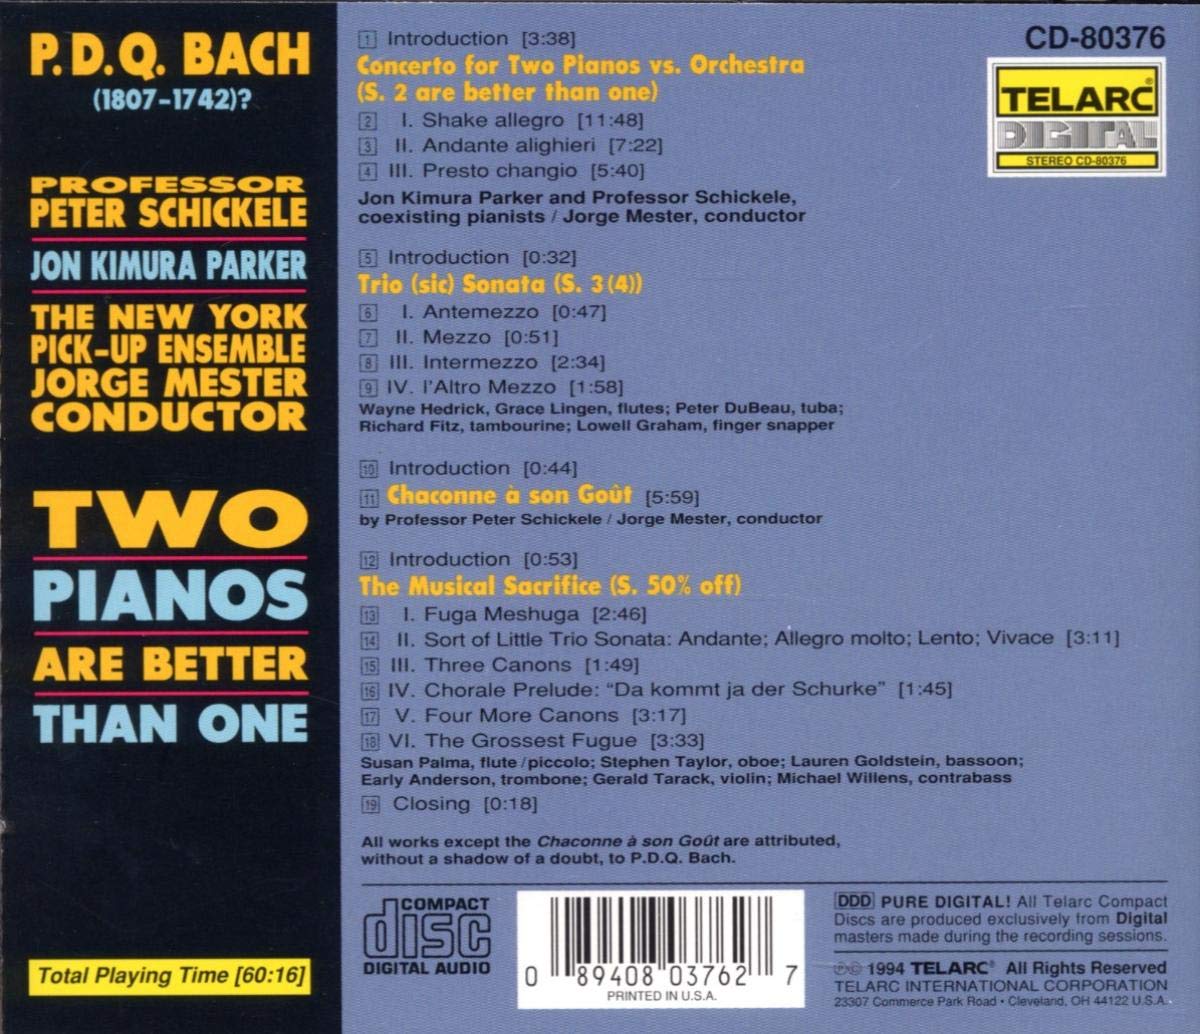 BACH, P.D.Q./SCHICKELE, PETER: TWO PIANOS ARE BETTER THAN ONE - Peter Schickele, Jon Kimura Parker